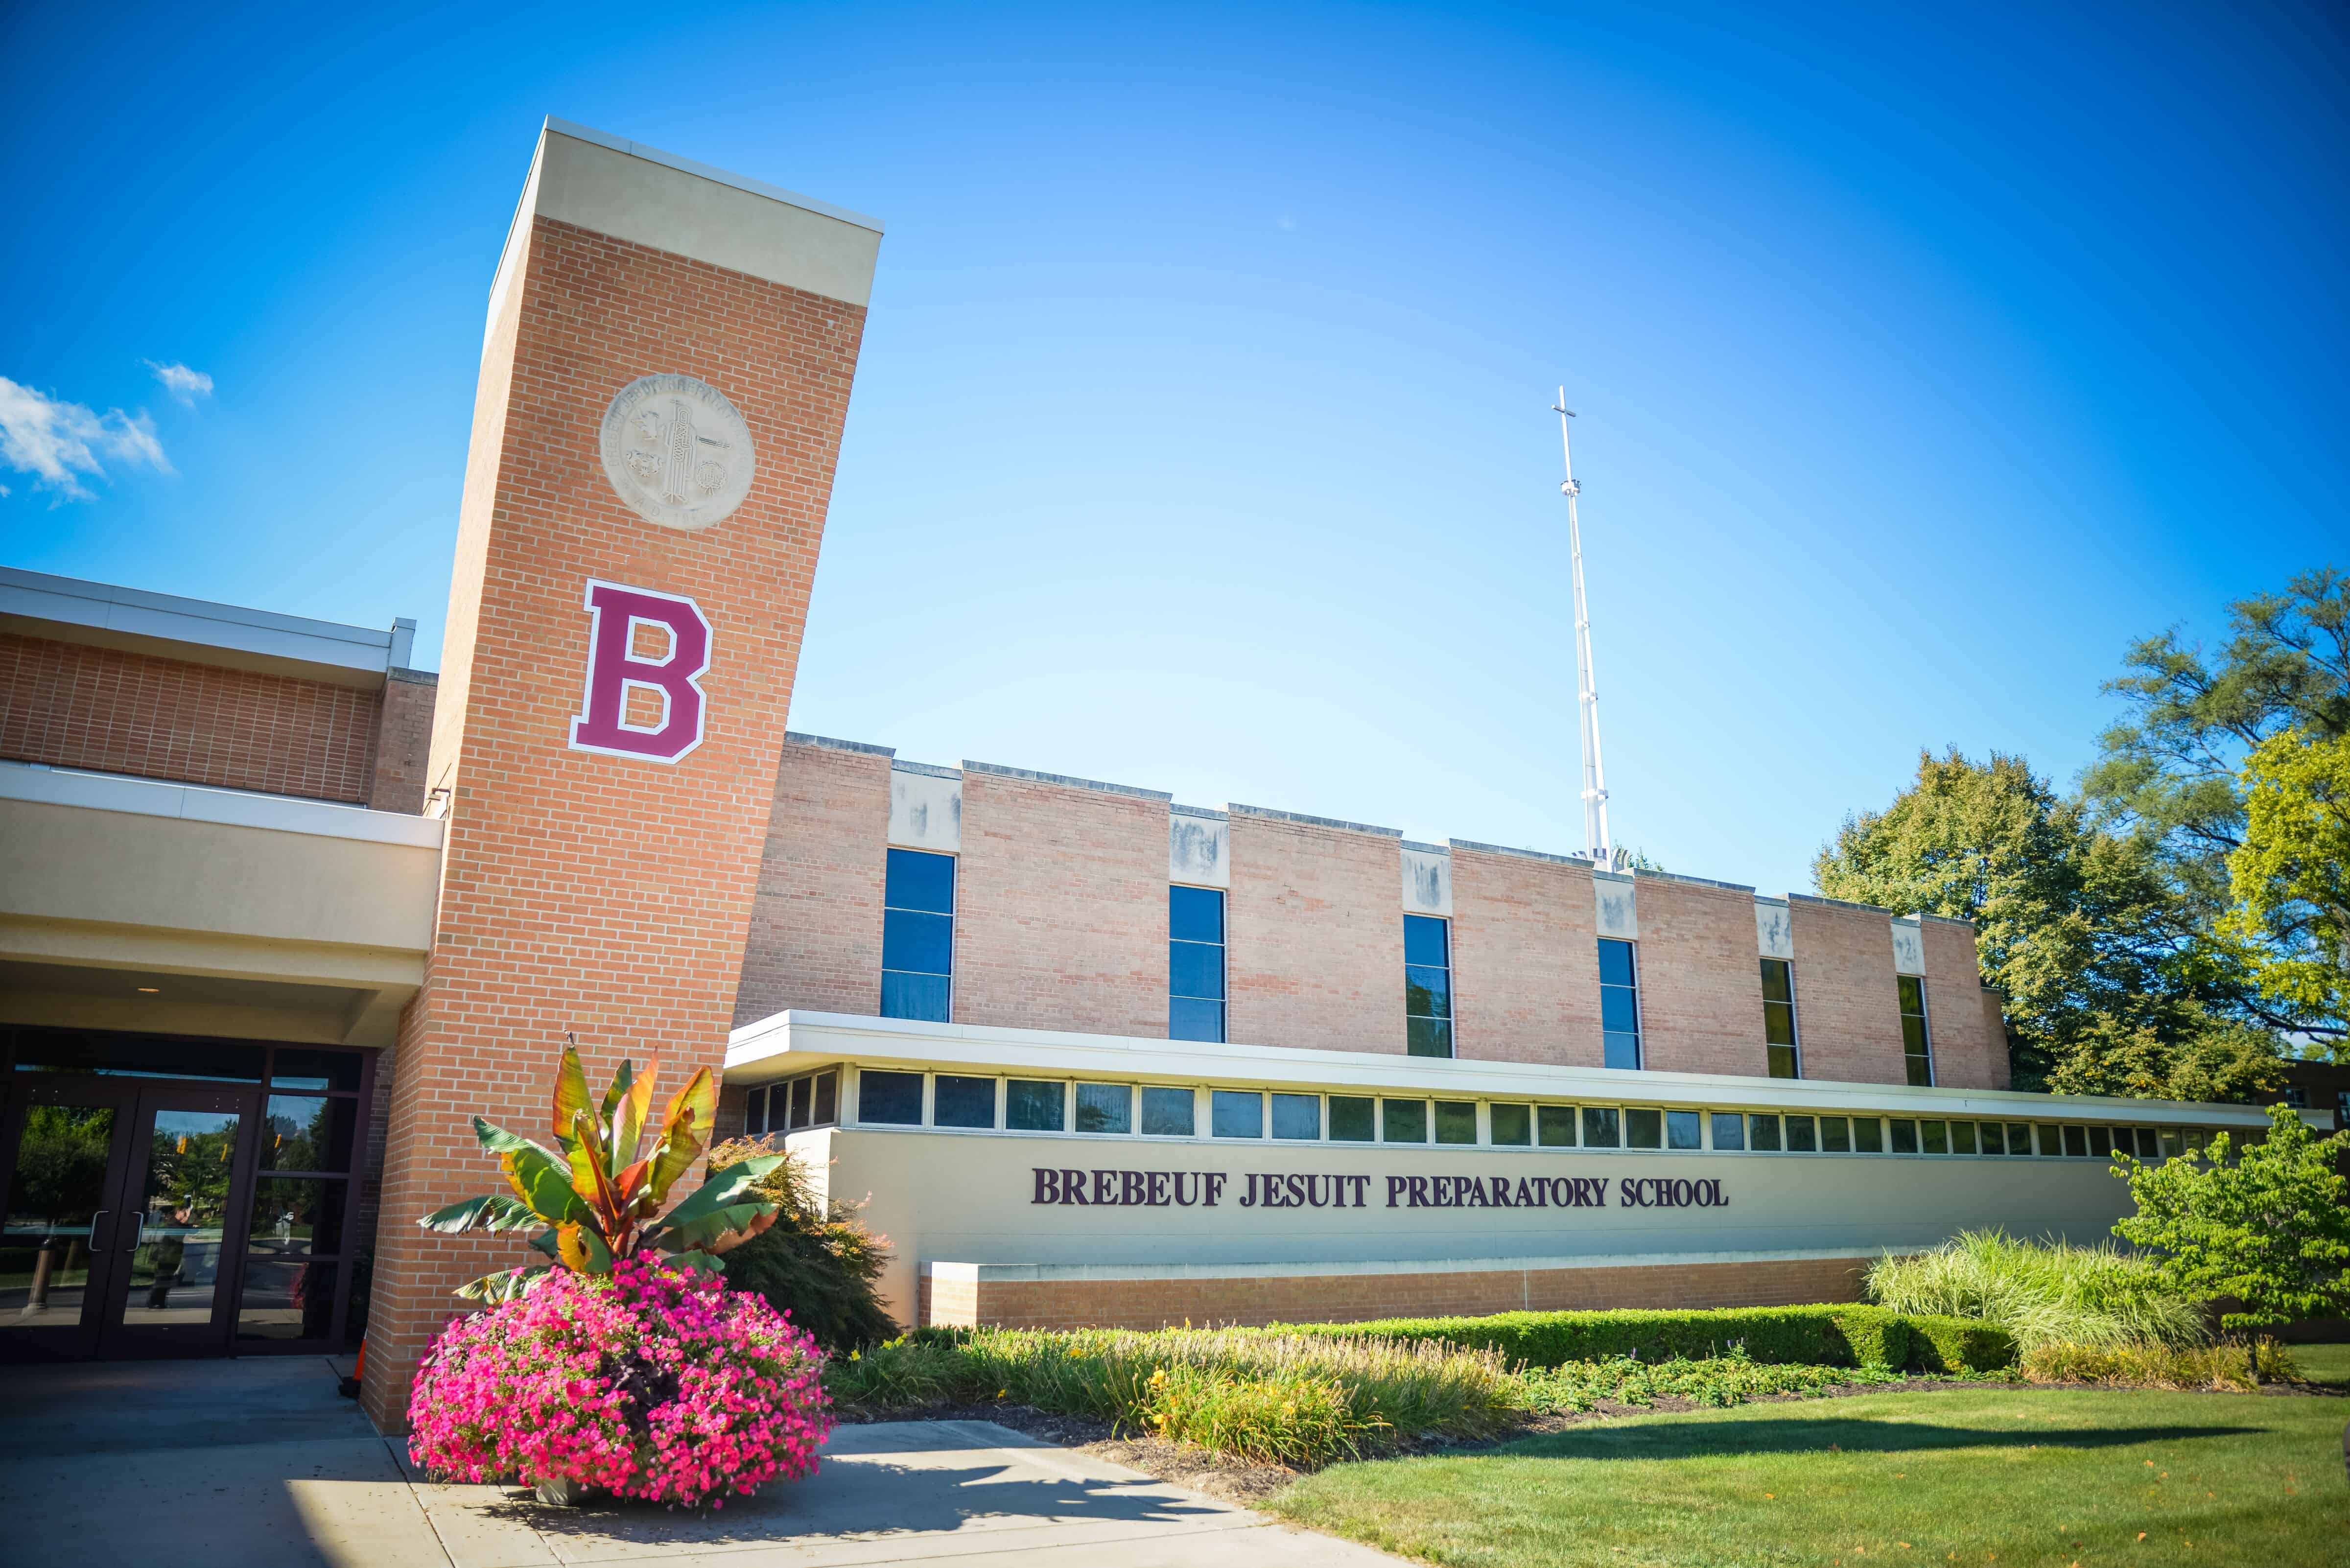 Brebeuf: A Time for Sorrow and Hope